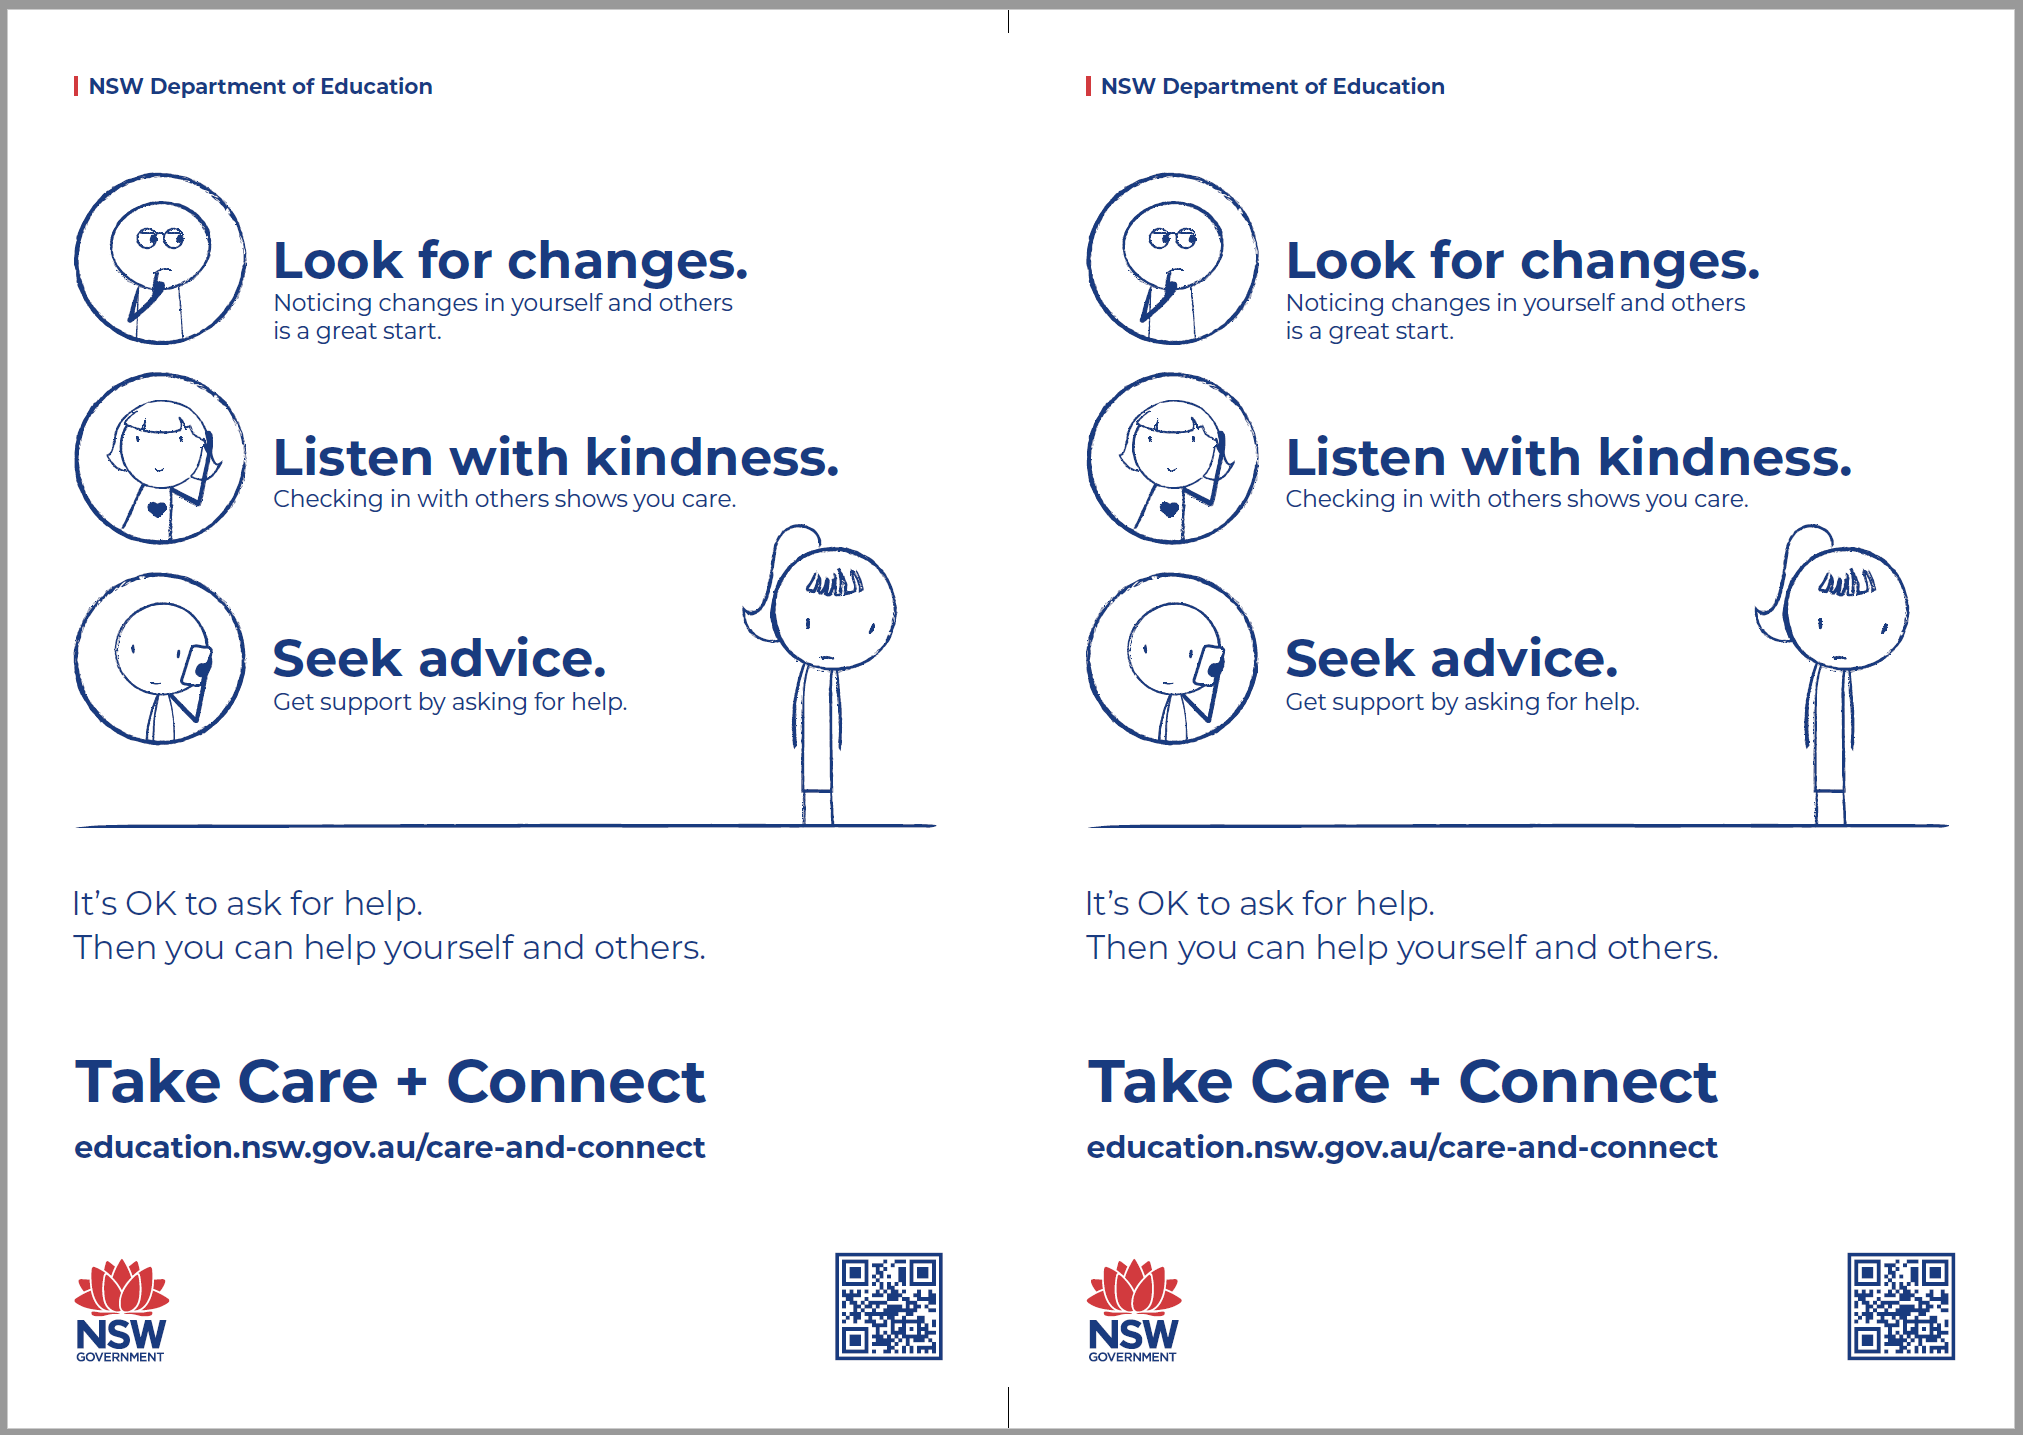 The Care and Connect instructional flyer thumbnail, featuring some text - Look for changes, listen with kindness and seek advice.